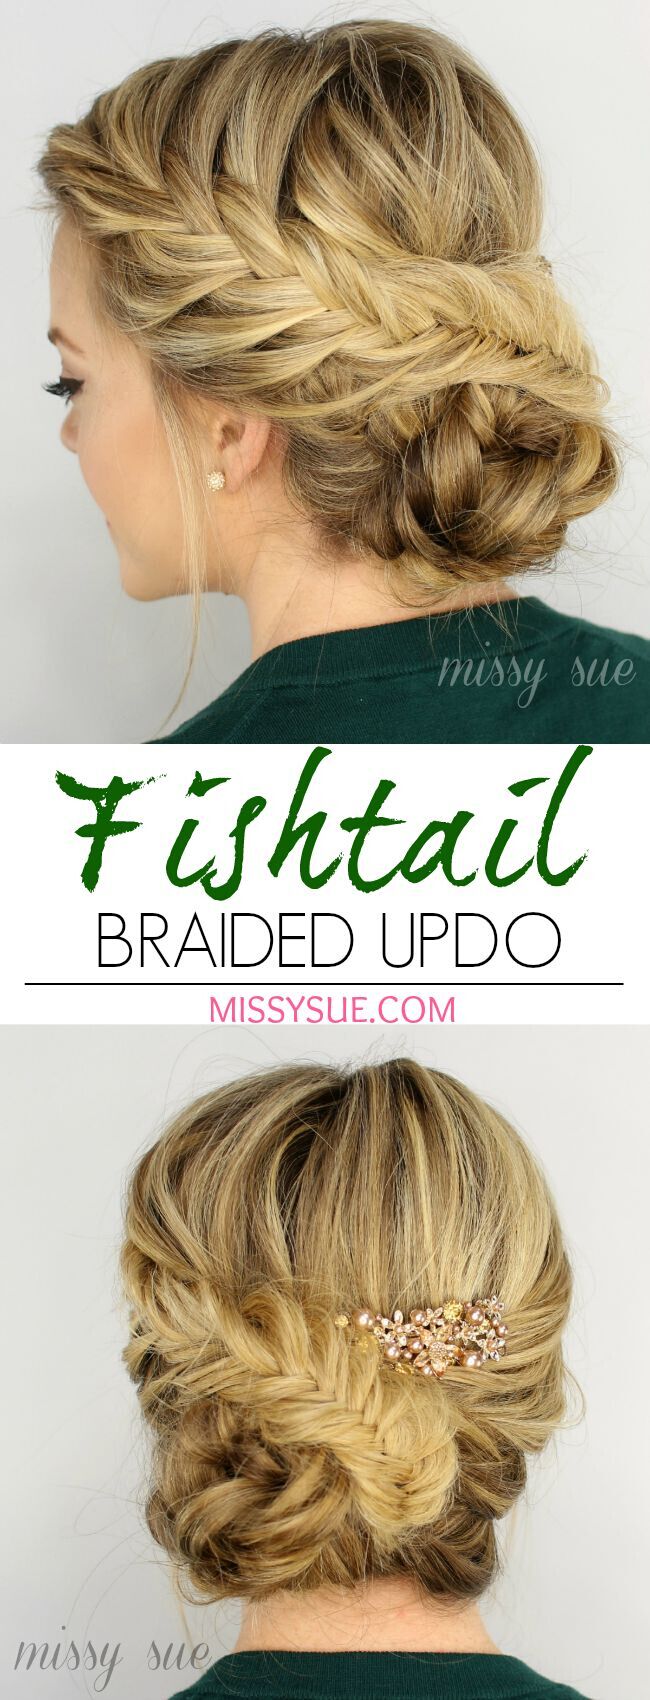 Braided updo with fish tail